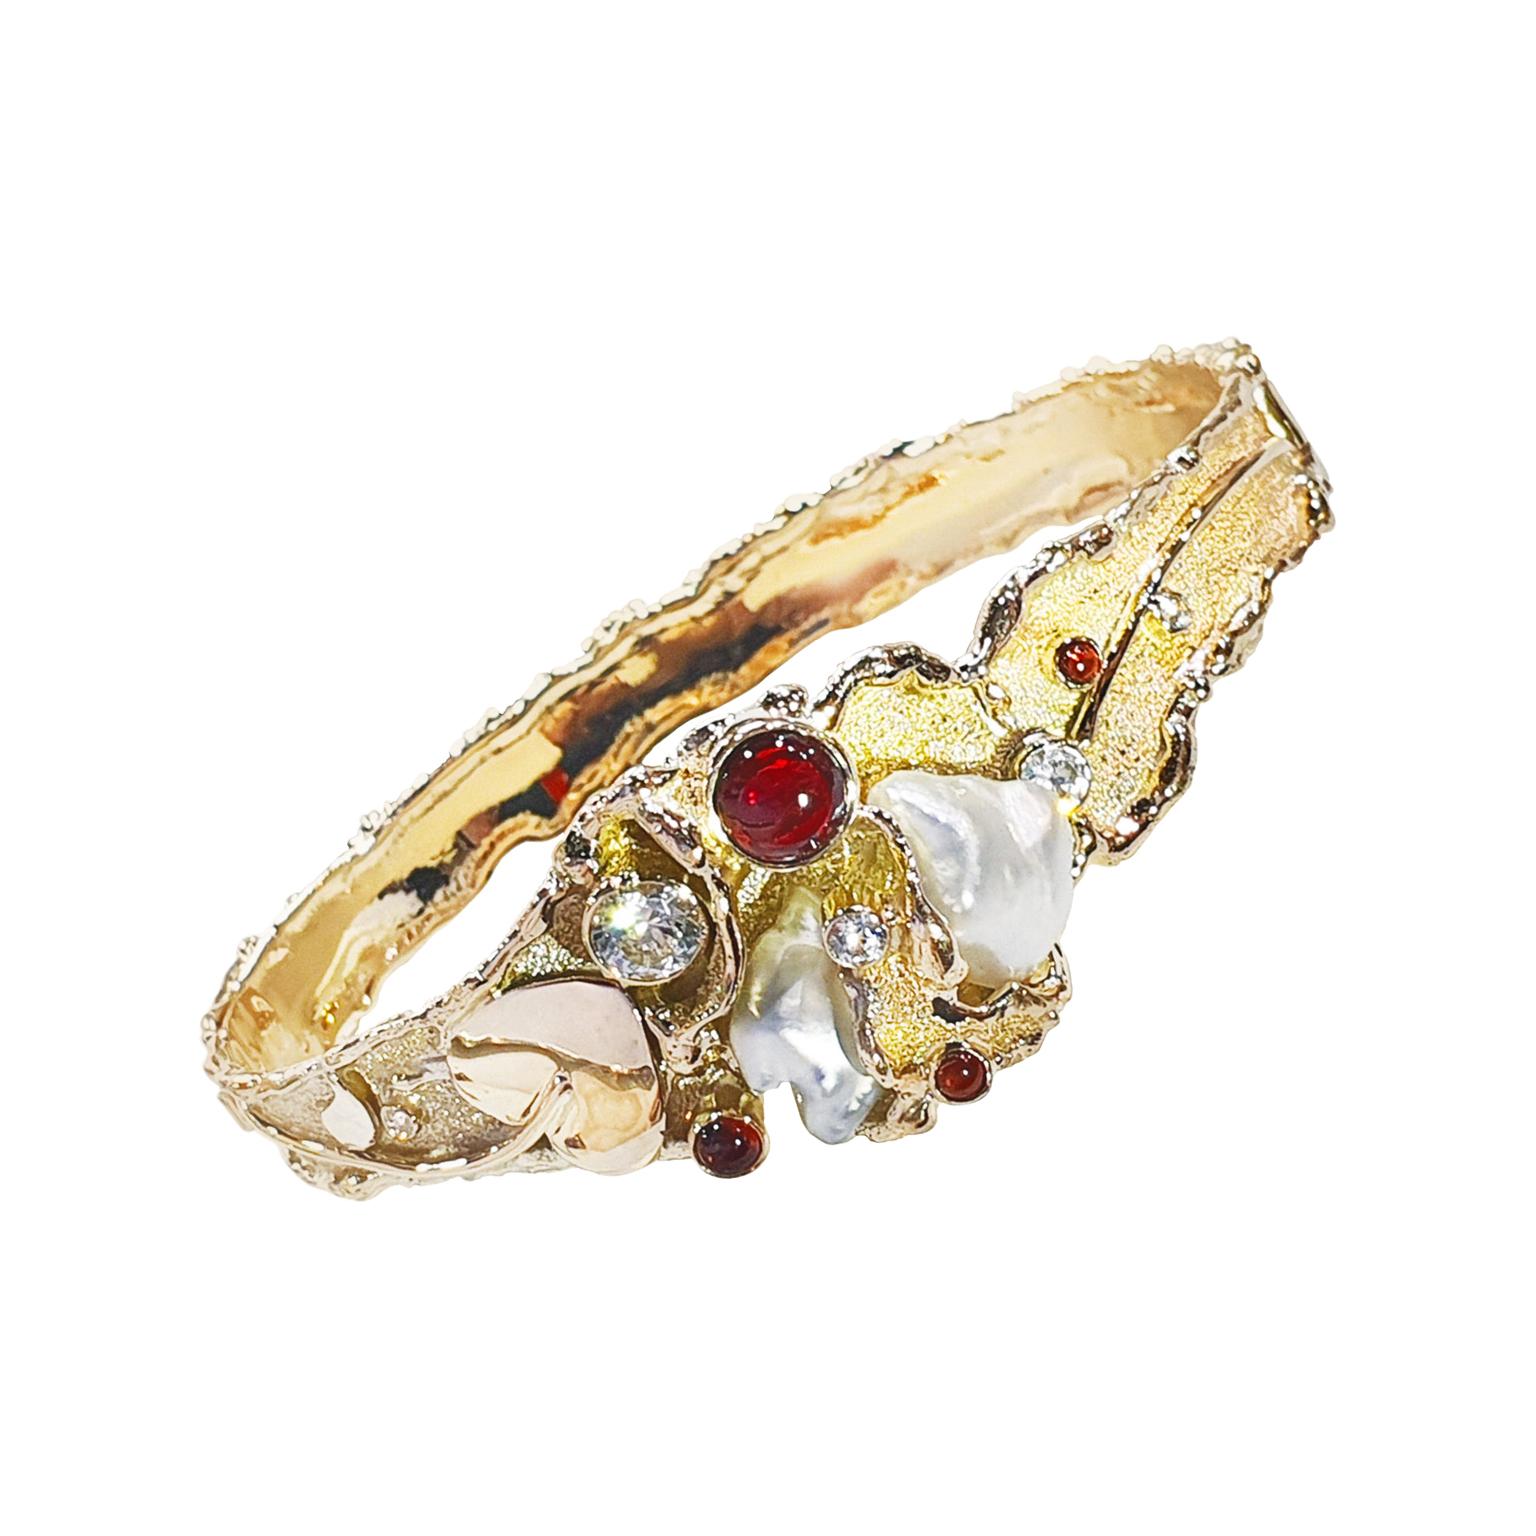 Paul Amey 9k Gold Signature Molten Edge Bangle with Garnets and Pearls For Sale